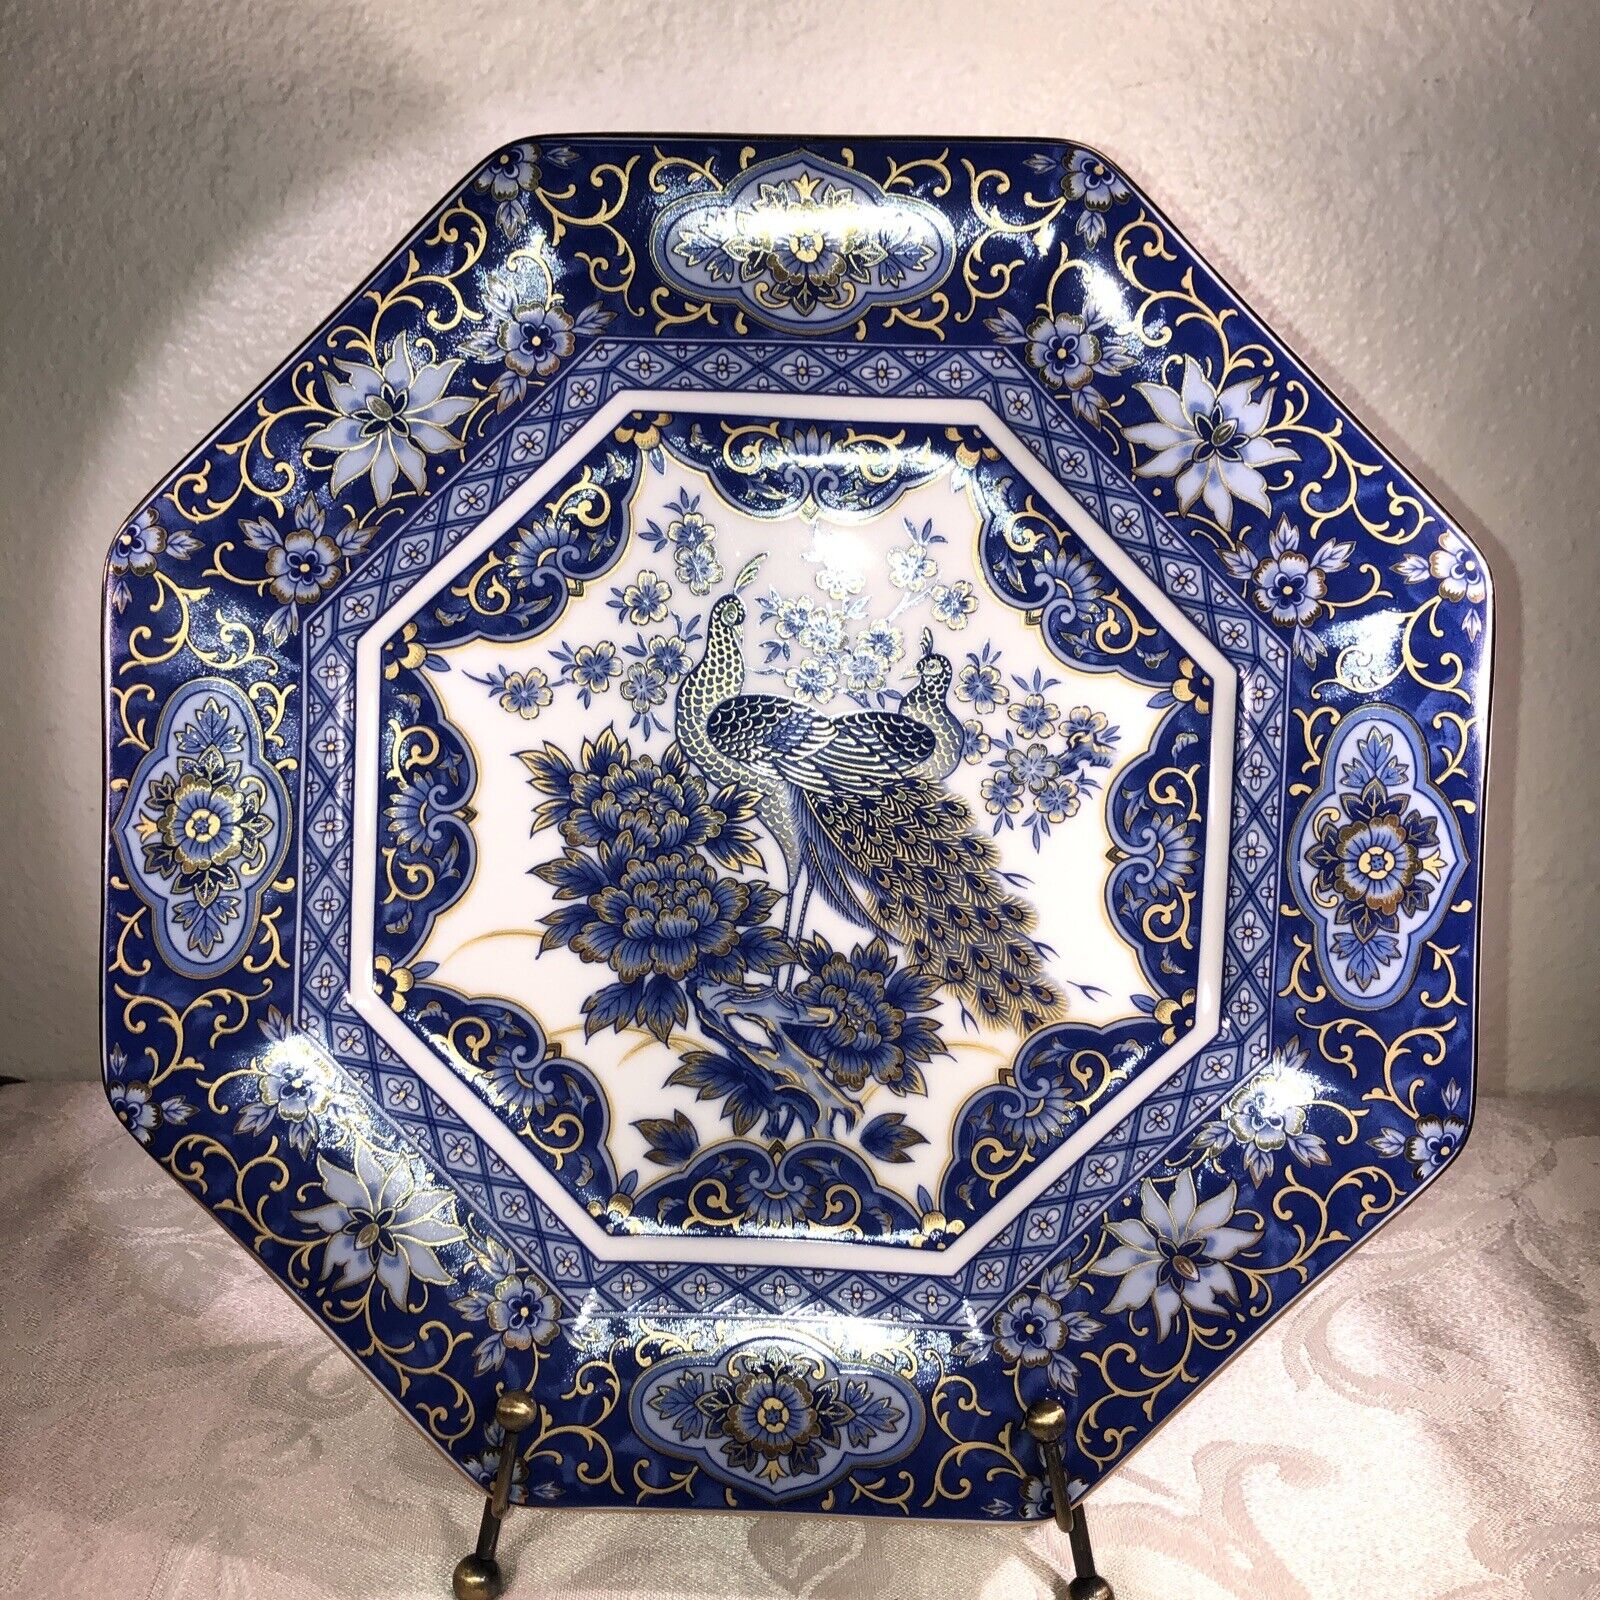 1983 Arnart Imports Inc. Porcelain Octagonal Imperial Peacock Plate. Preowned.